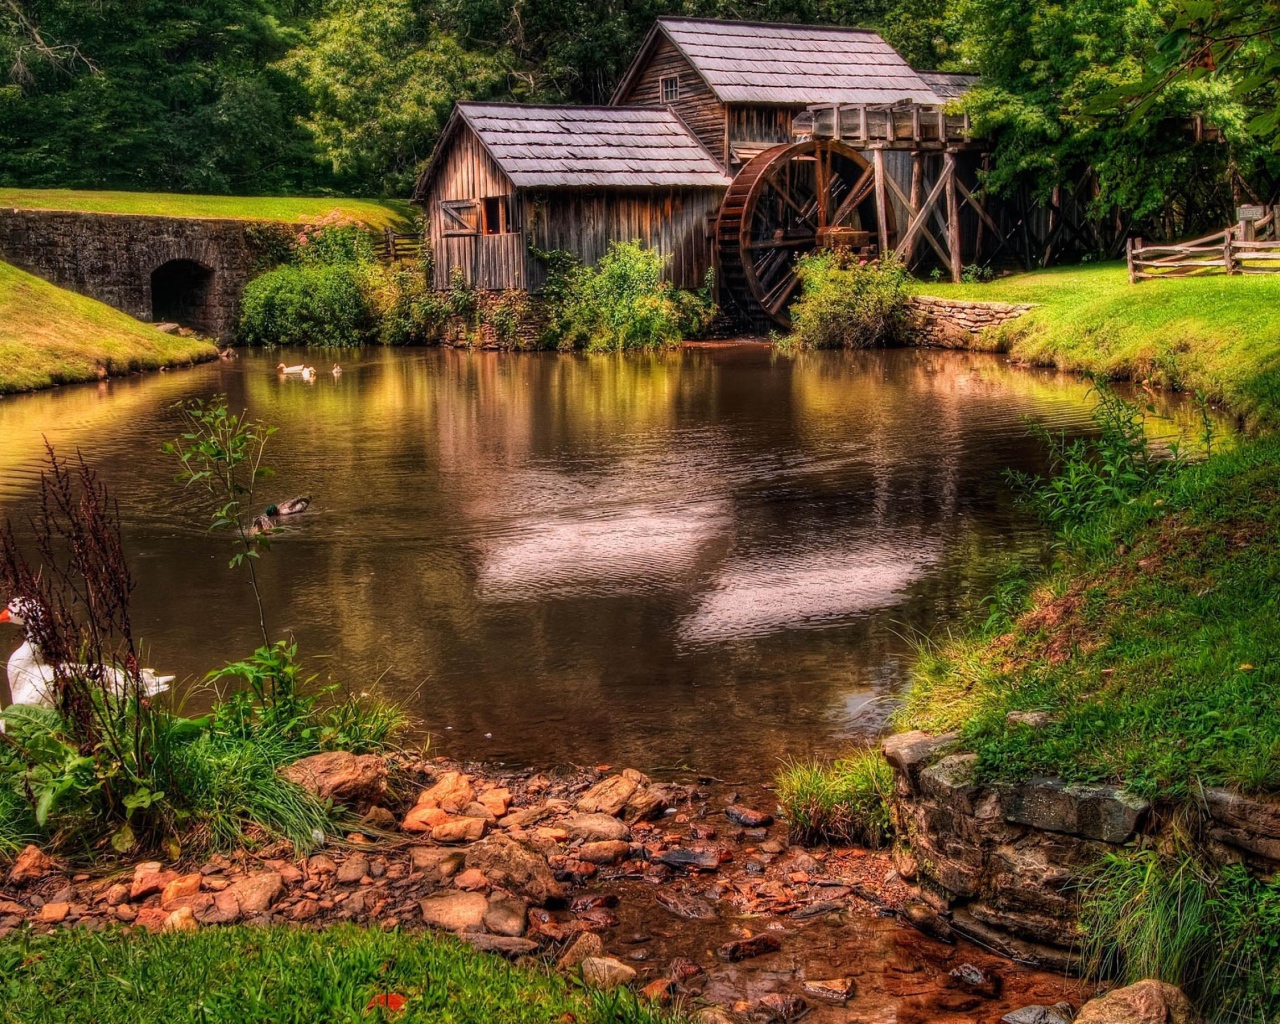 Mill by the river